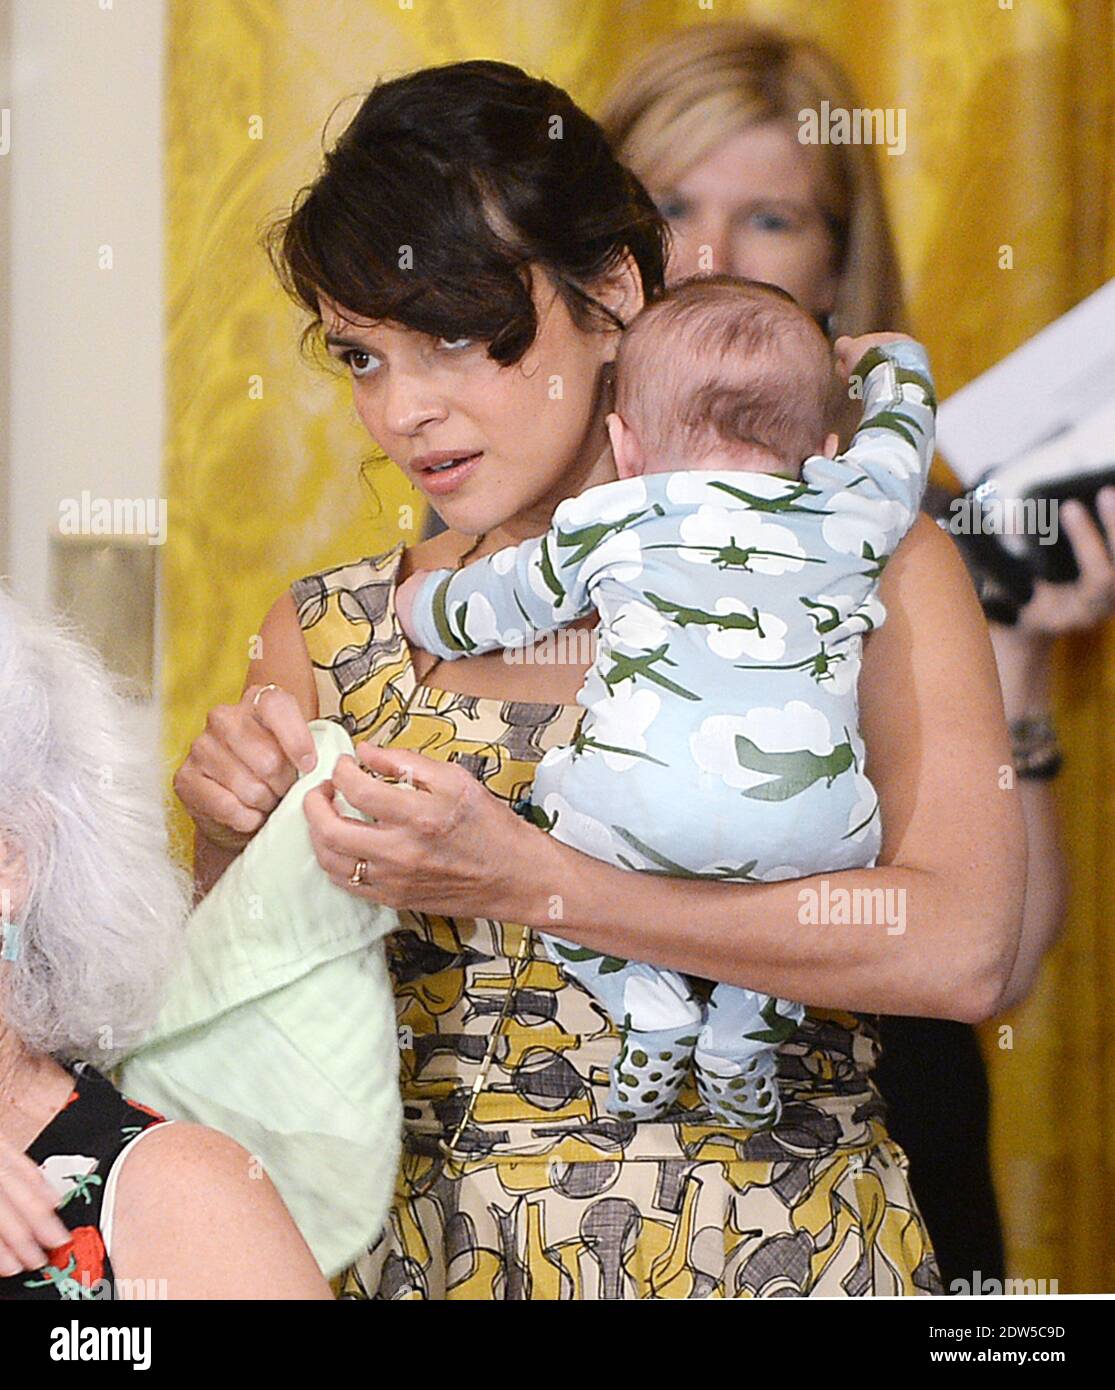 Singer Norah Jones with her 3 month old baby attends a event to honor  military mothers in the East Room of the White House in Washington, DC,  USA, on May 12, 2014.